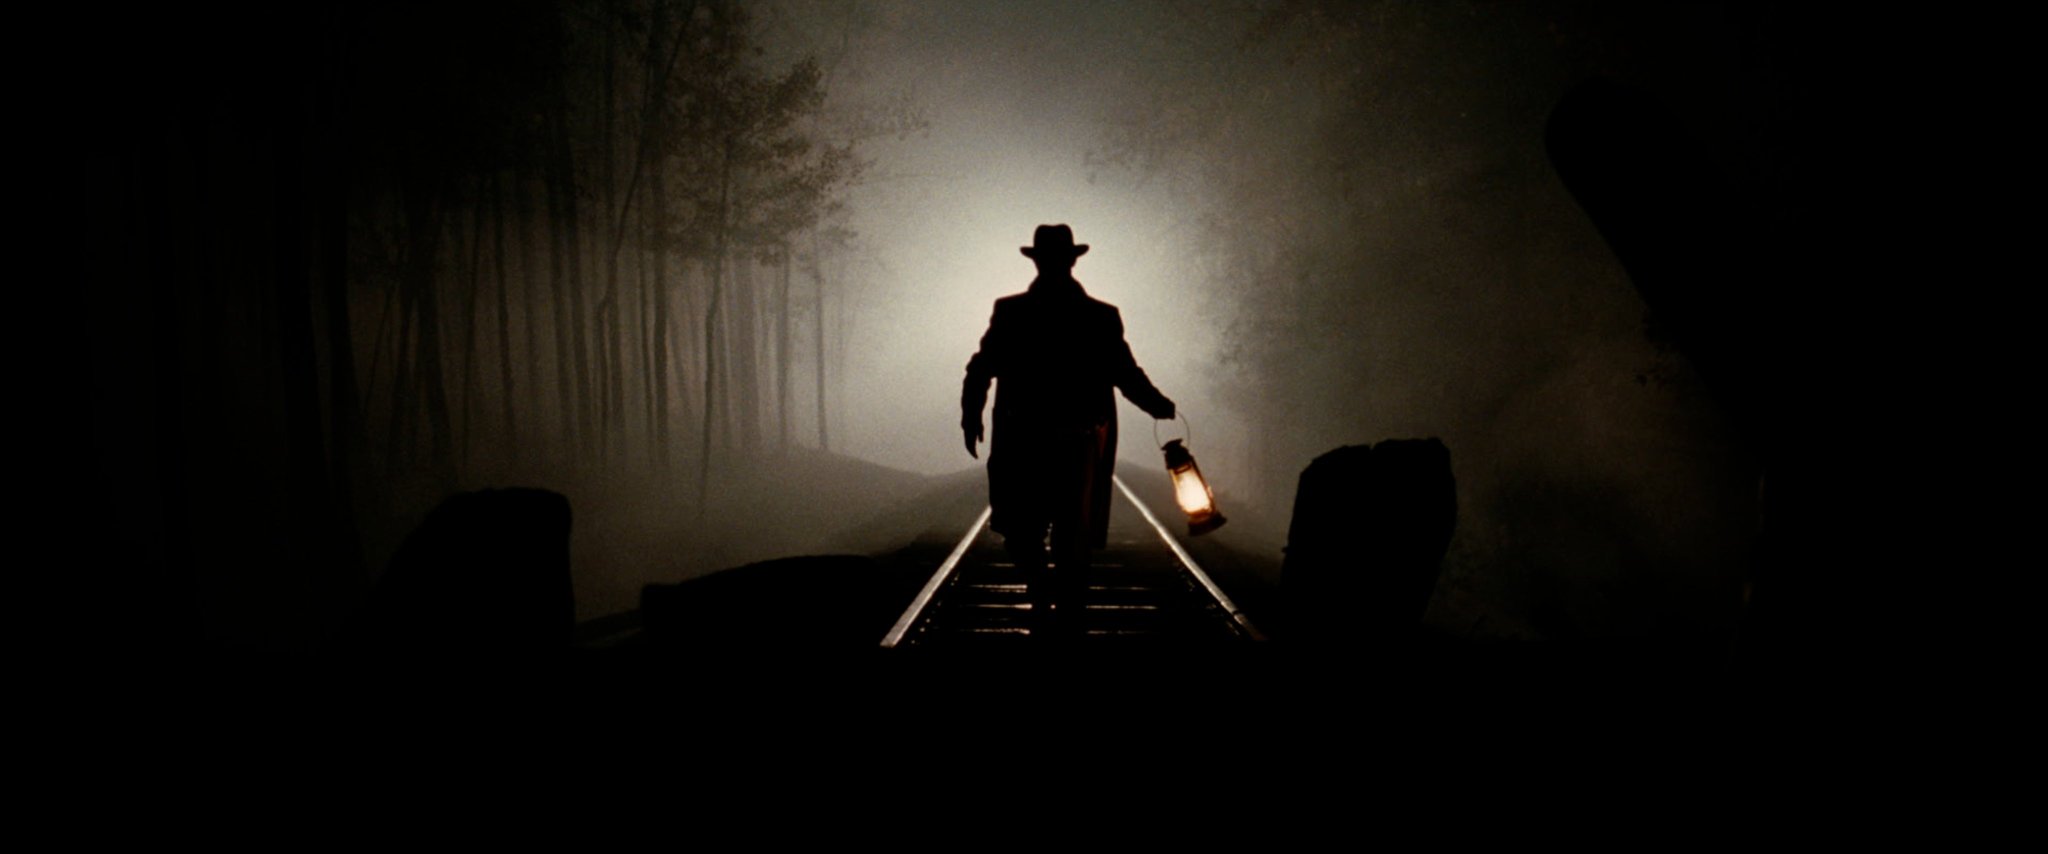 Impossible to pick a favorite Roger Deakins shot. 

Happy 72nd birthday to one of the all-time greats. 